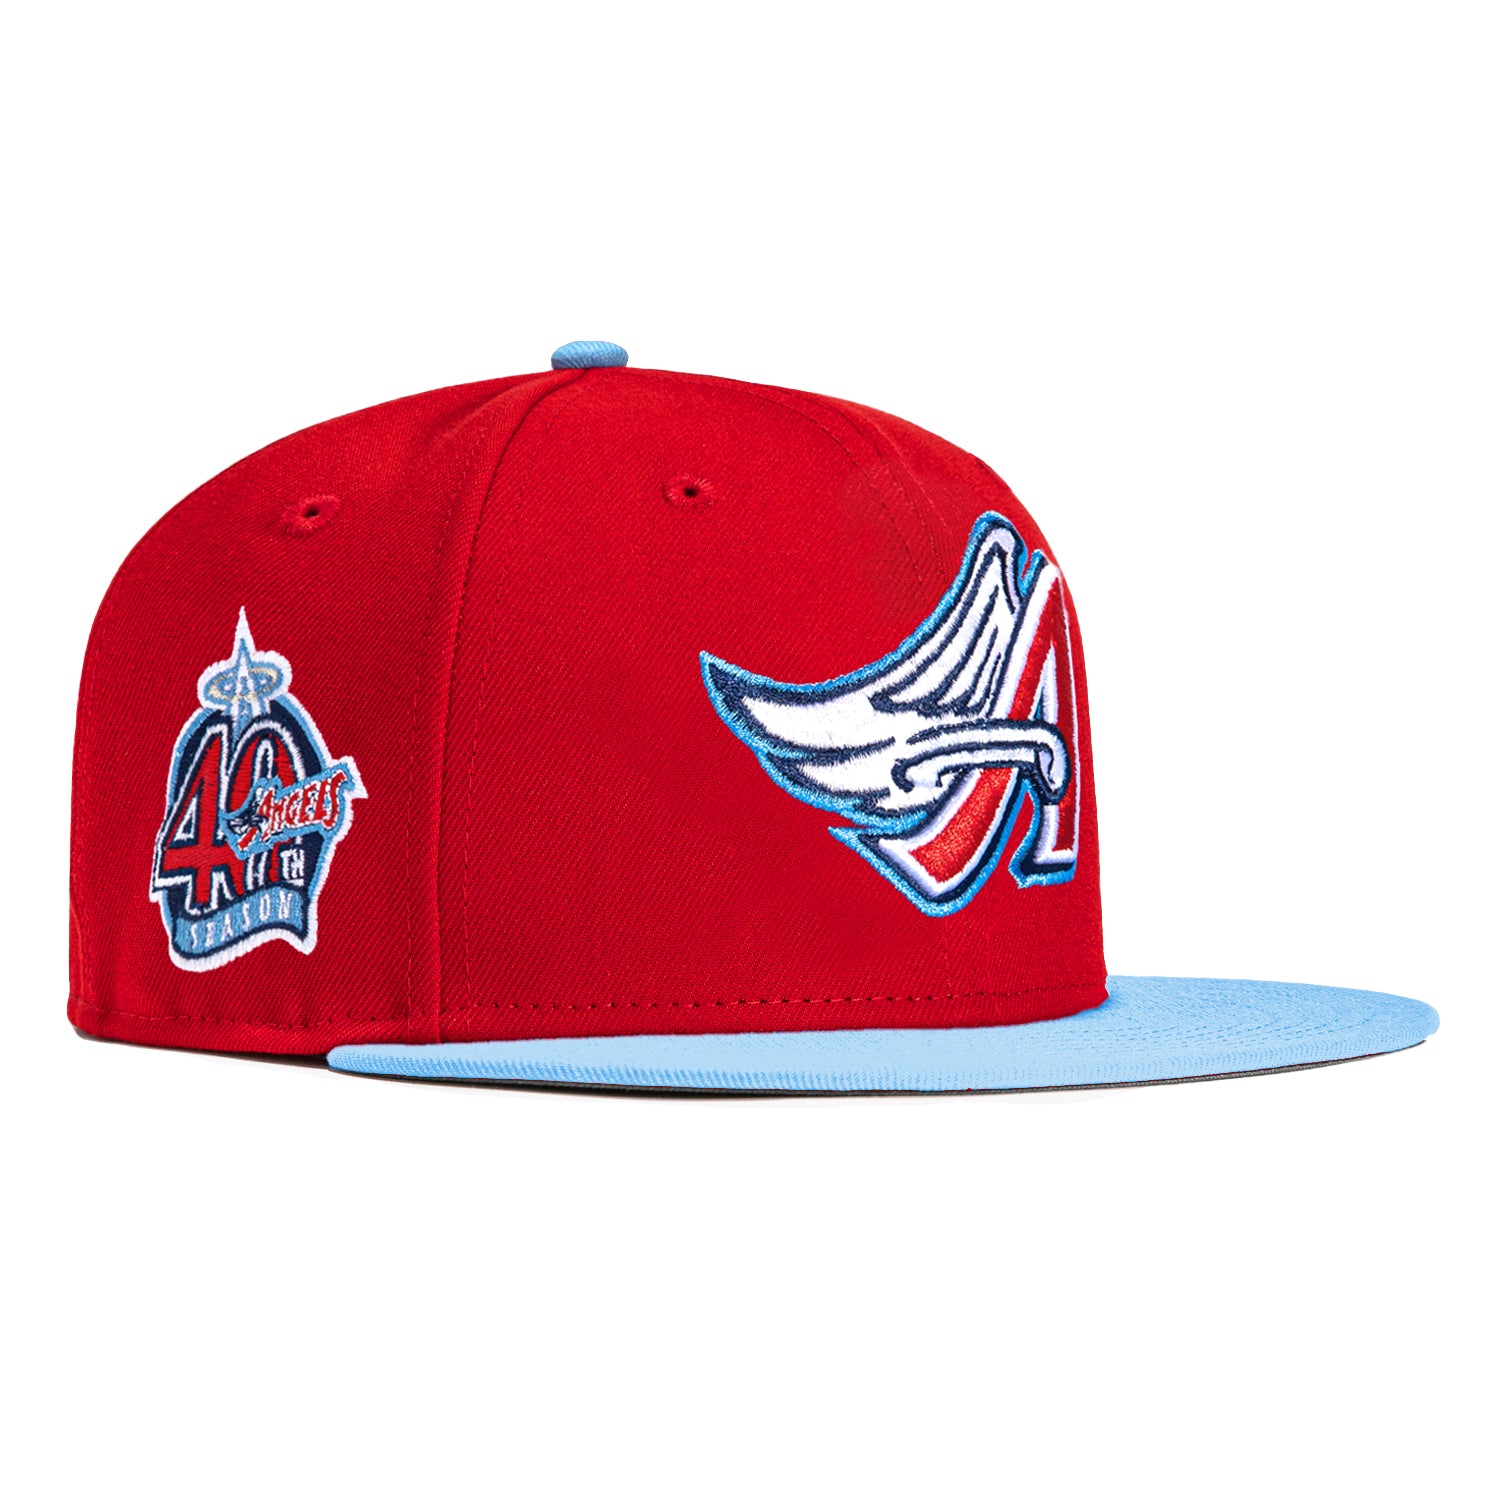 Los Angeles Angels of Anaheim New Era City Connect 9FIFTY Adjustable  Snapback Cap